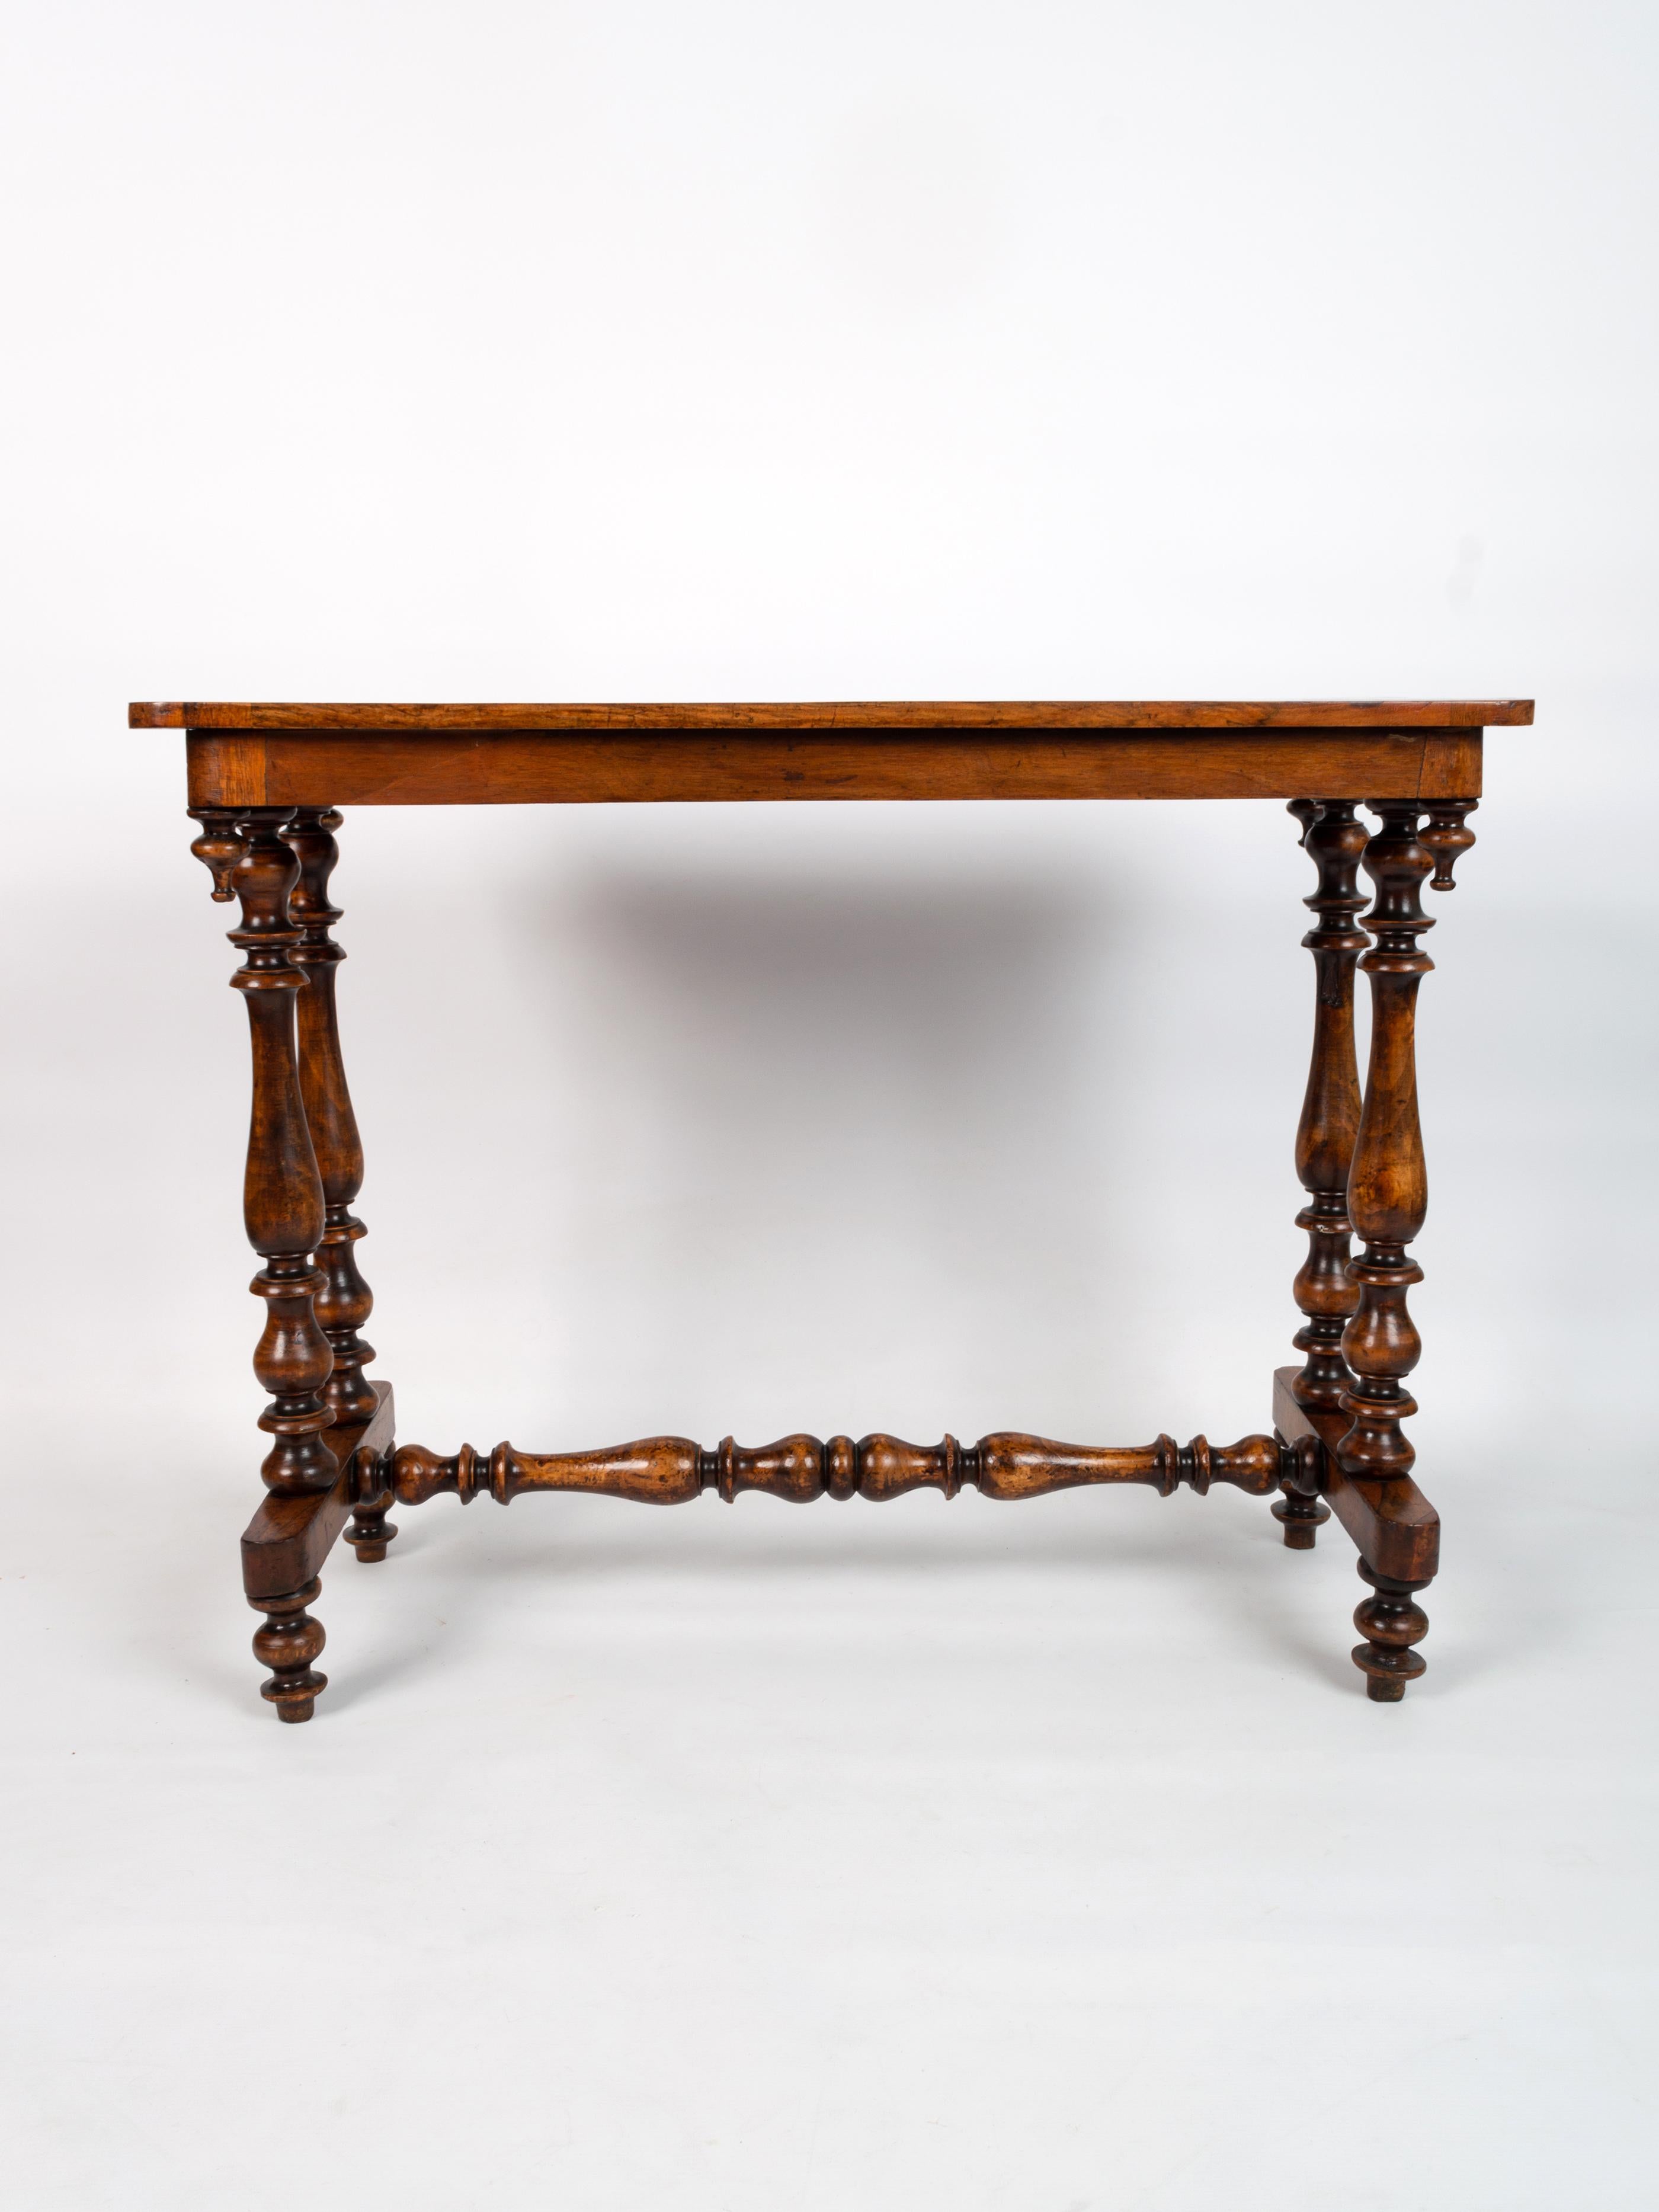 Antique English Edwardian inlaid walnut hall Table C.1900

An Edwardian inlaid walnut stretcher table, the foliate decorated rectangular top on turned supports, united by a stretcher.

In excellent condition commensurate with age.

Measures: